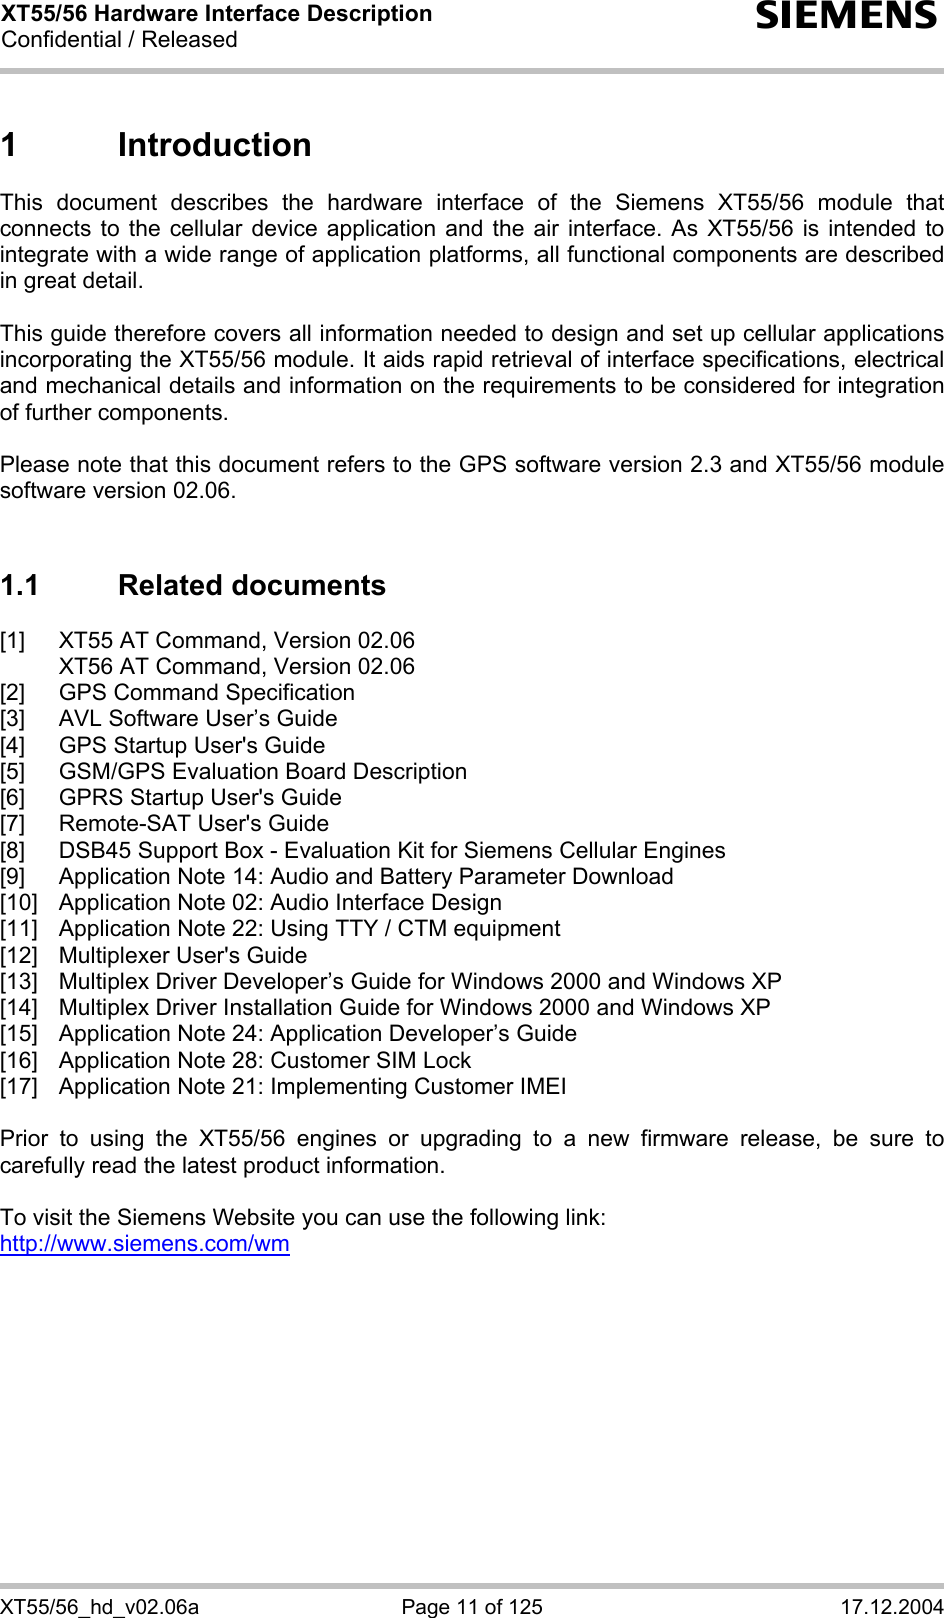 XT55/56 Hardware Interface Description Confidential / Released s XT55/56_hd_v02.06a  Page 11 of 125  17.12.2004 1 Introduction This document describes the hardware interface of the Siemens XT55/56 module that connects to the cellular device application and the air interface. As XT55/56 is intended to integrate with a wide range of application platforms, all functional components are described in great detail.  This guide therefore covers all information needed to design and set up cellular applications incorporating the XT55/56 module. It aids rapid retrieval of interface specifications, electrical and mechanical details and information on the requirements to be considered for integration of further components.   Please note that this document refers to the GPS software version 2.3 and XT55/56 module software version 02.06.  1.1 Related documents [1]  XT55 AT Command, Version 02.06   XT56 AT Command, Version 02.06 [2]  GPS Command Specification [3]  AVL Software User’s Guide [4]  GPS Startup User&apos;s Guide [5]  GSM/GPS Evaluation Board Description [6]  GPRS Startup User&apos;s Guide [7]  Remote-SAT User&apos;s Guide [8]  DSB45 Support Box - Evaluation Kit for Siemens Cellular Engines [9]  Application Note 14: Audio and Battery Parameter Download  [10]  Application Note 02: Audio Interface Design  [11]  Application Note 22: Using TTY / CTM equipment  [12]  Multiplexer User&apos;s Guide [13]  Multiplex Driver Developer’s Guide for Windows 2000 and Windows XP [14]  Multiplex Driver Installation Guide for Windows 2000 and Windows XP [15]  Application Note 24: Application Developer’s Guide [16]  Application Note 28: Customer SIM Lock [17]  Application Note 21: Implementing Customer IMEI  Prior to using the XT55/56 engines or upgrading to a new firmware release, be sure to carefully read the latest product information.  To visit the Siemens Website you can use the following link: http://www.siemens.com/wm   